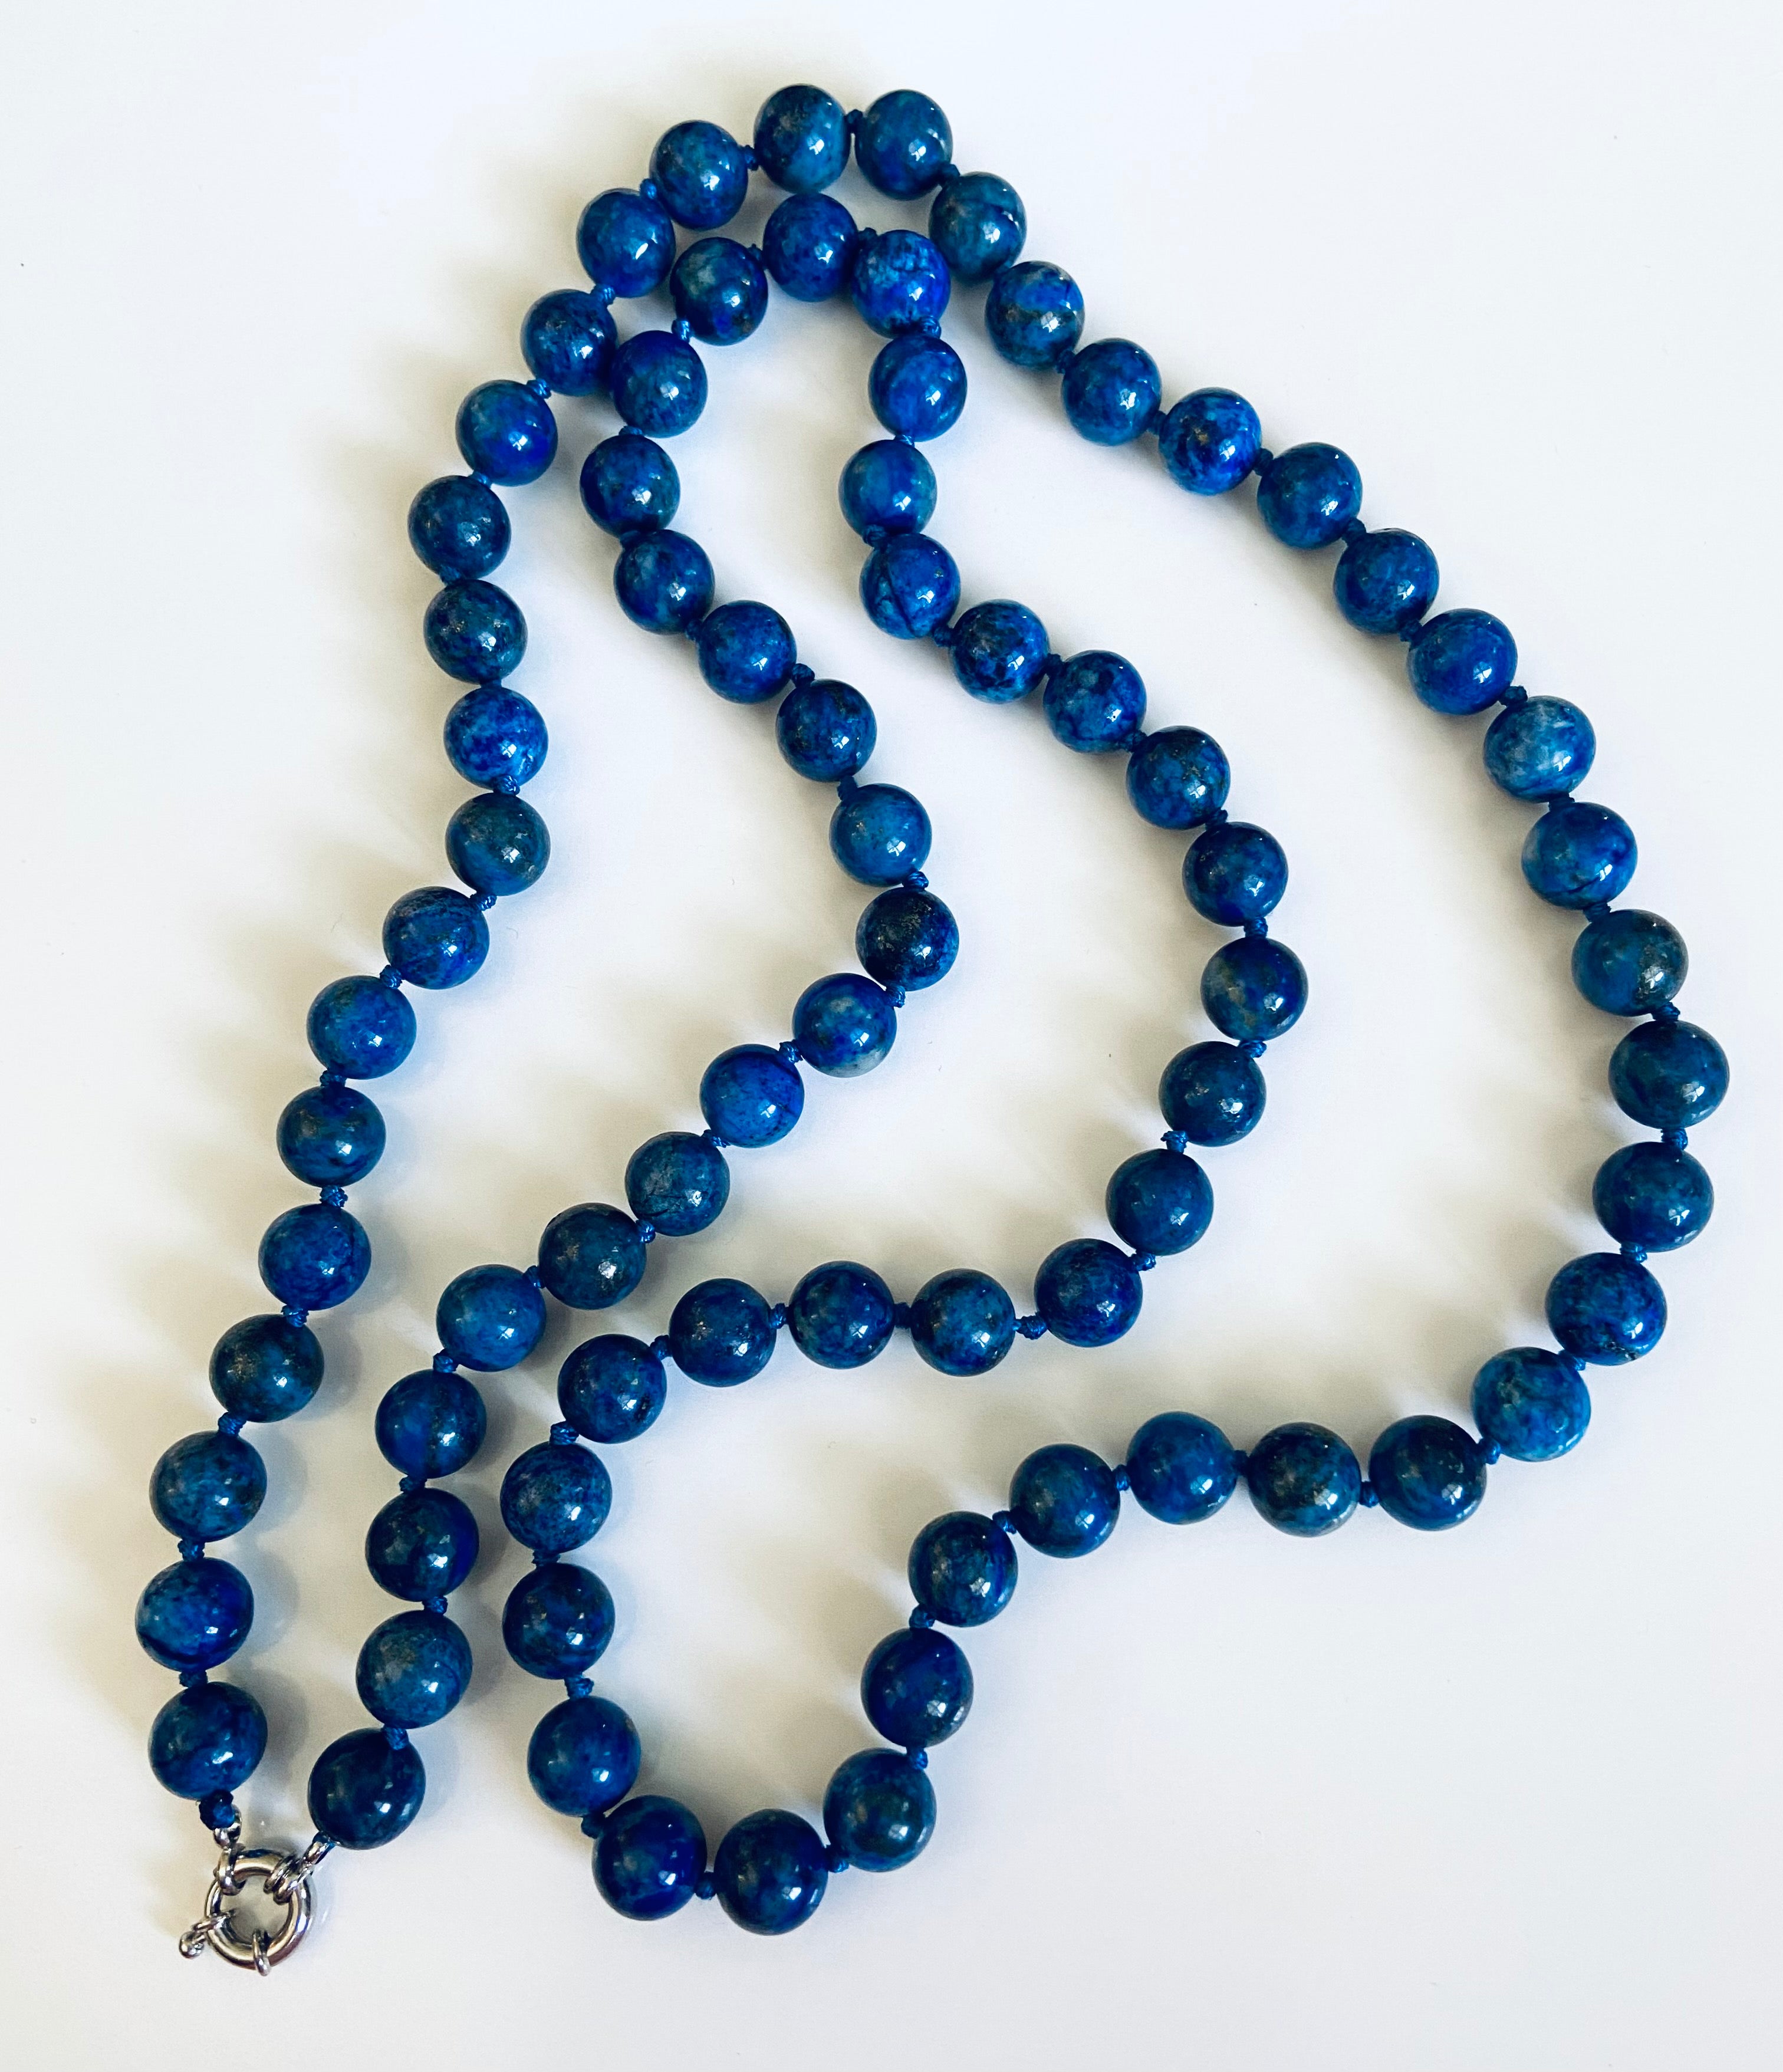 Buy Reiki Crystal Products Natural Lapis Lazuli Mala / Necklace Crystal  Stone Oval Bead Mala for Reiki Healing and Crystal Healing Stone Online at  Best Prices in India - JioMart.